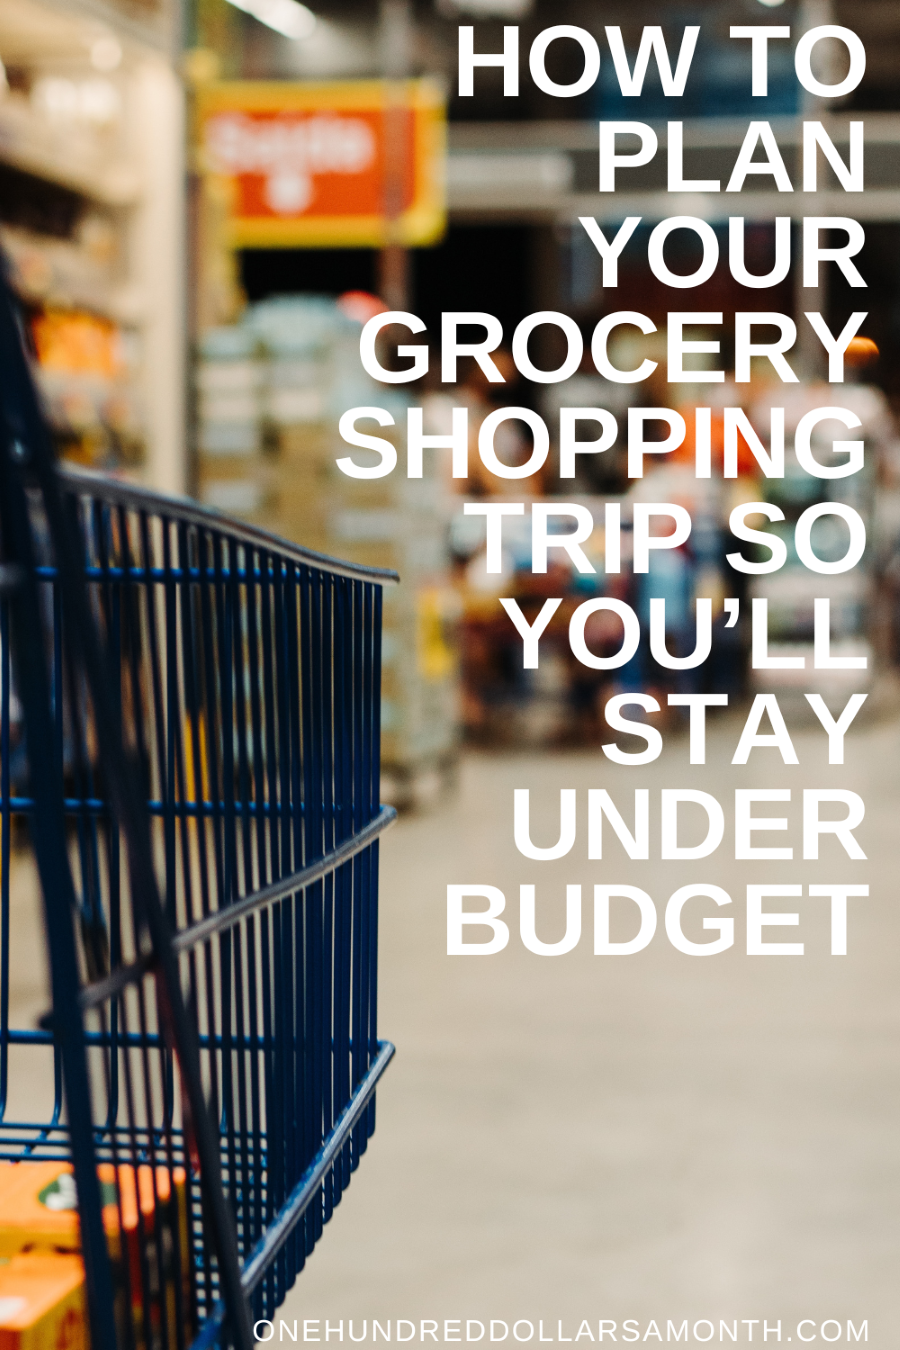 How to Plan Out Your Grocery Shopping Trip So You’ll Stay Under Budget